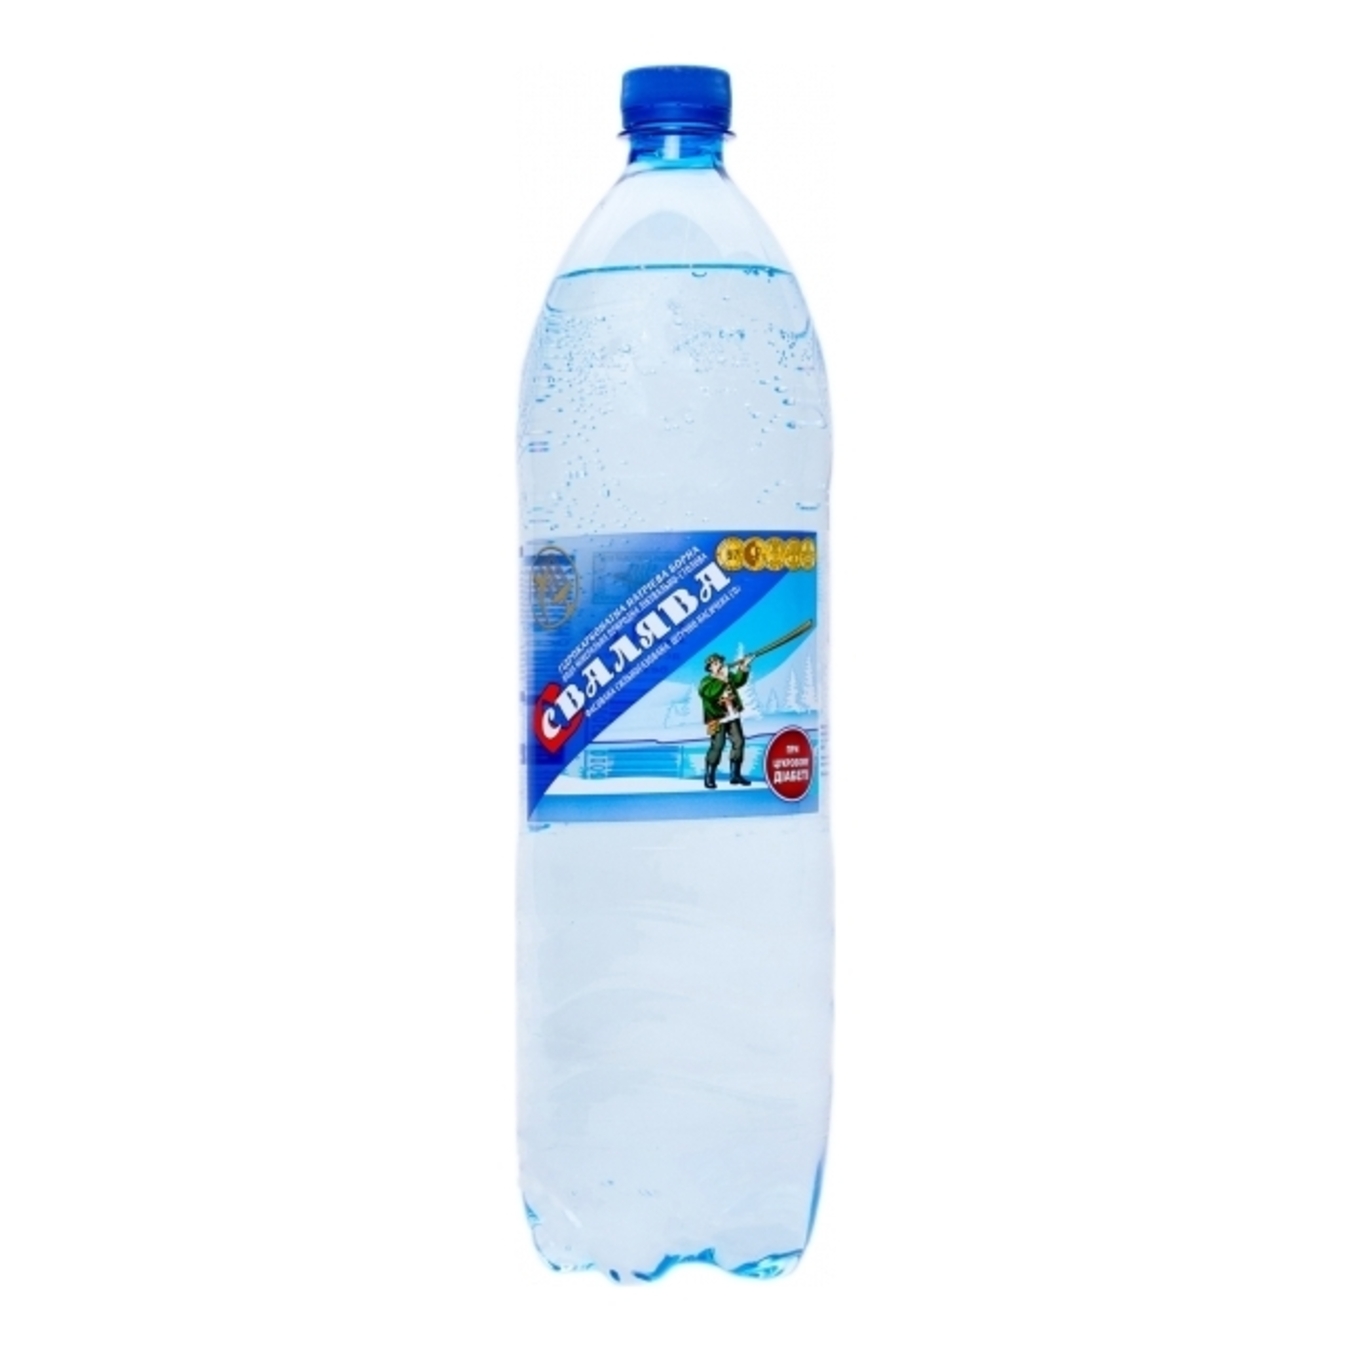 Sparkling medical-table mineral water Svalyava 1,5l